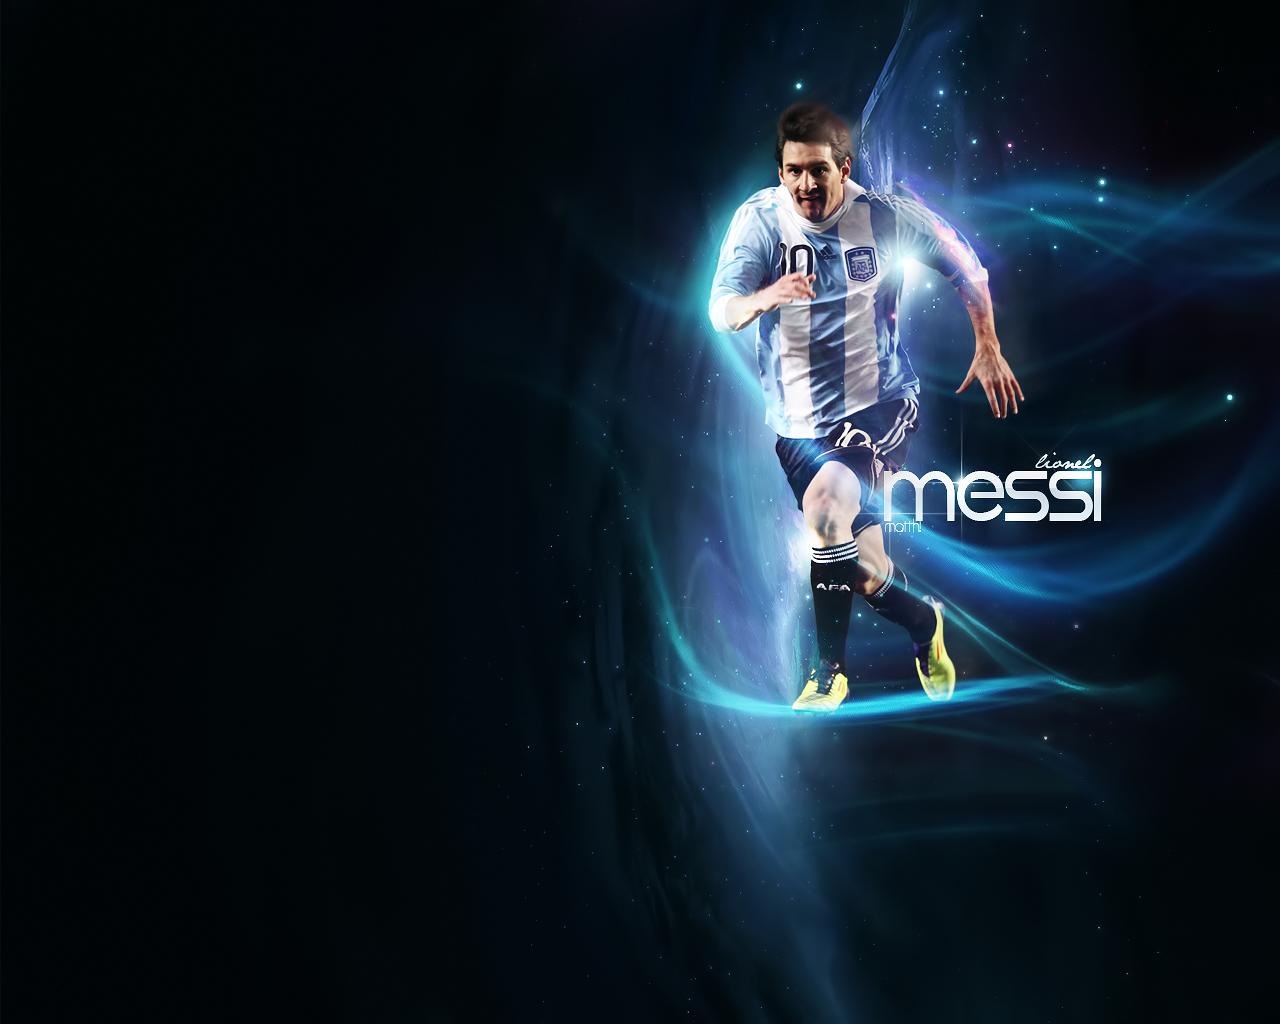 Lionel Messi Cool Wallpaper Free Lionel Messi Cool Background